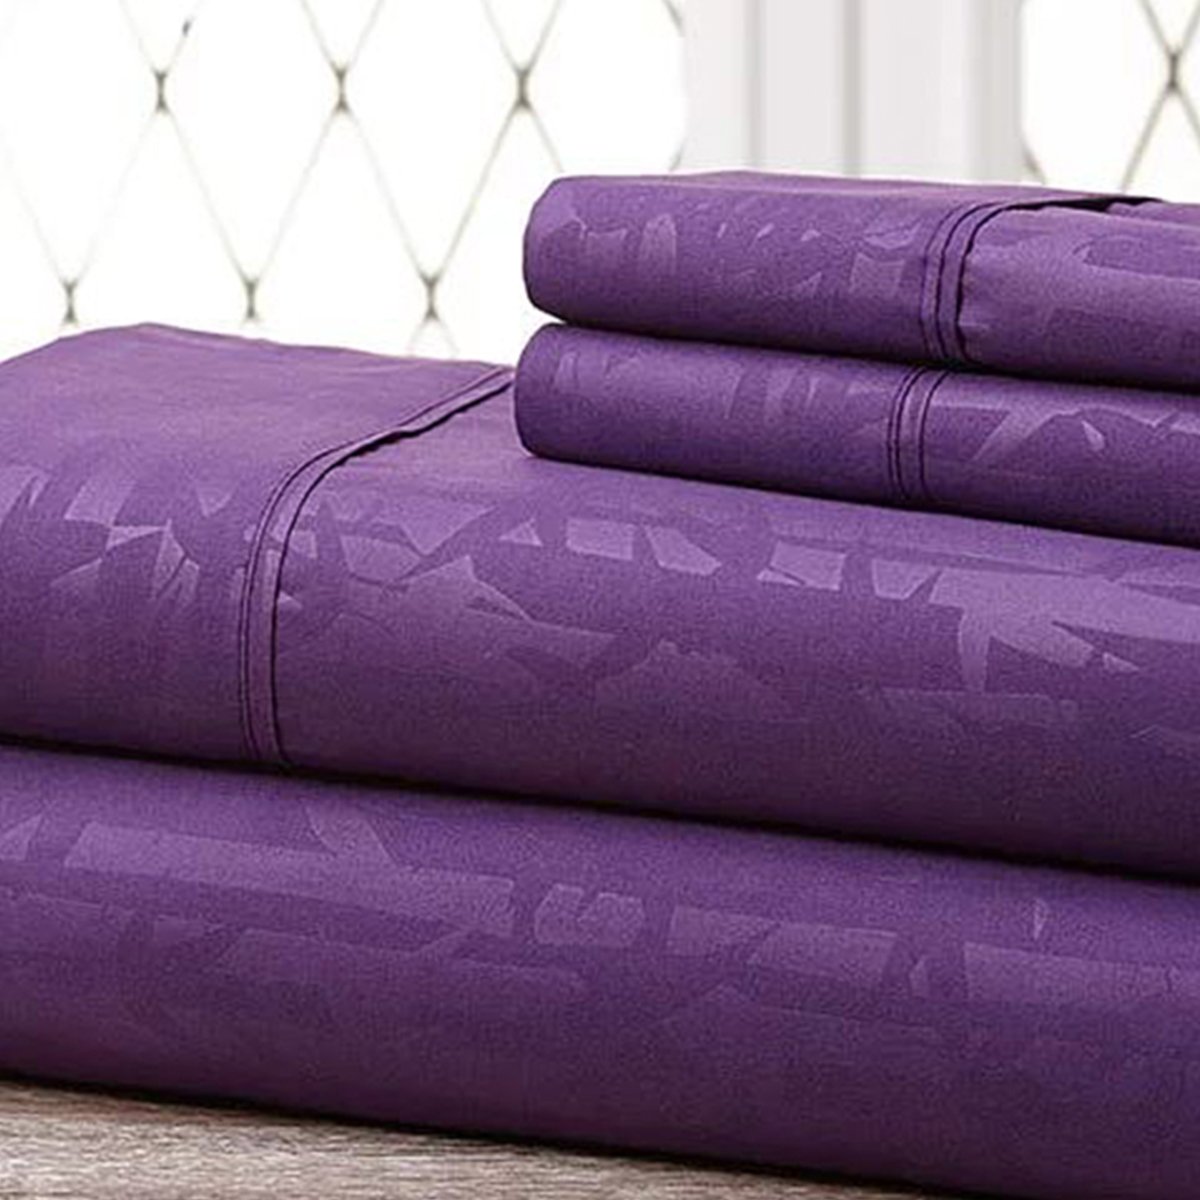 Hny-4pc-eb-pur-q Super-soft 1600 Series Bamboo Embossed Bed Sheet, Purple - Queen, 4 Piece